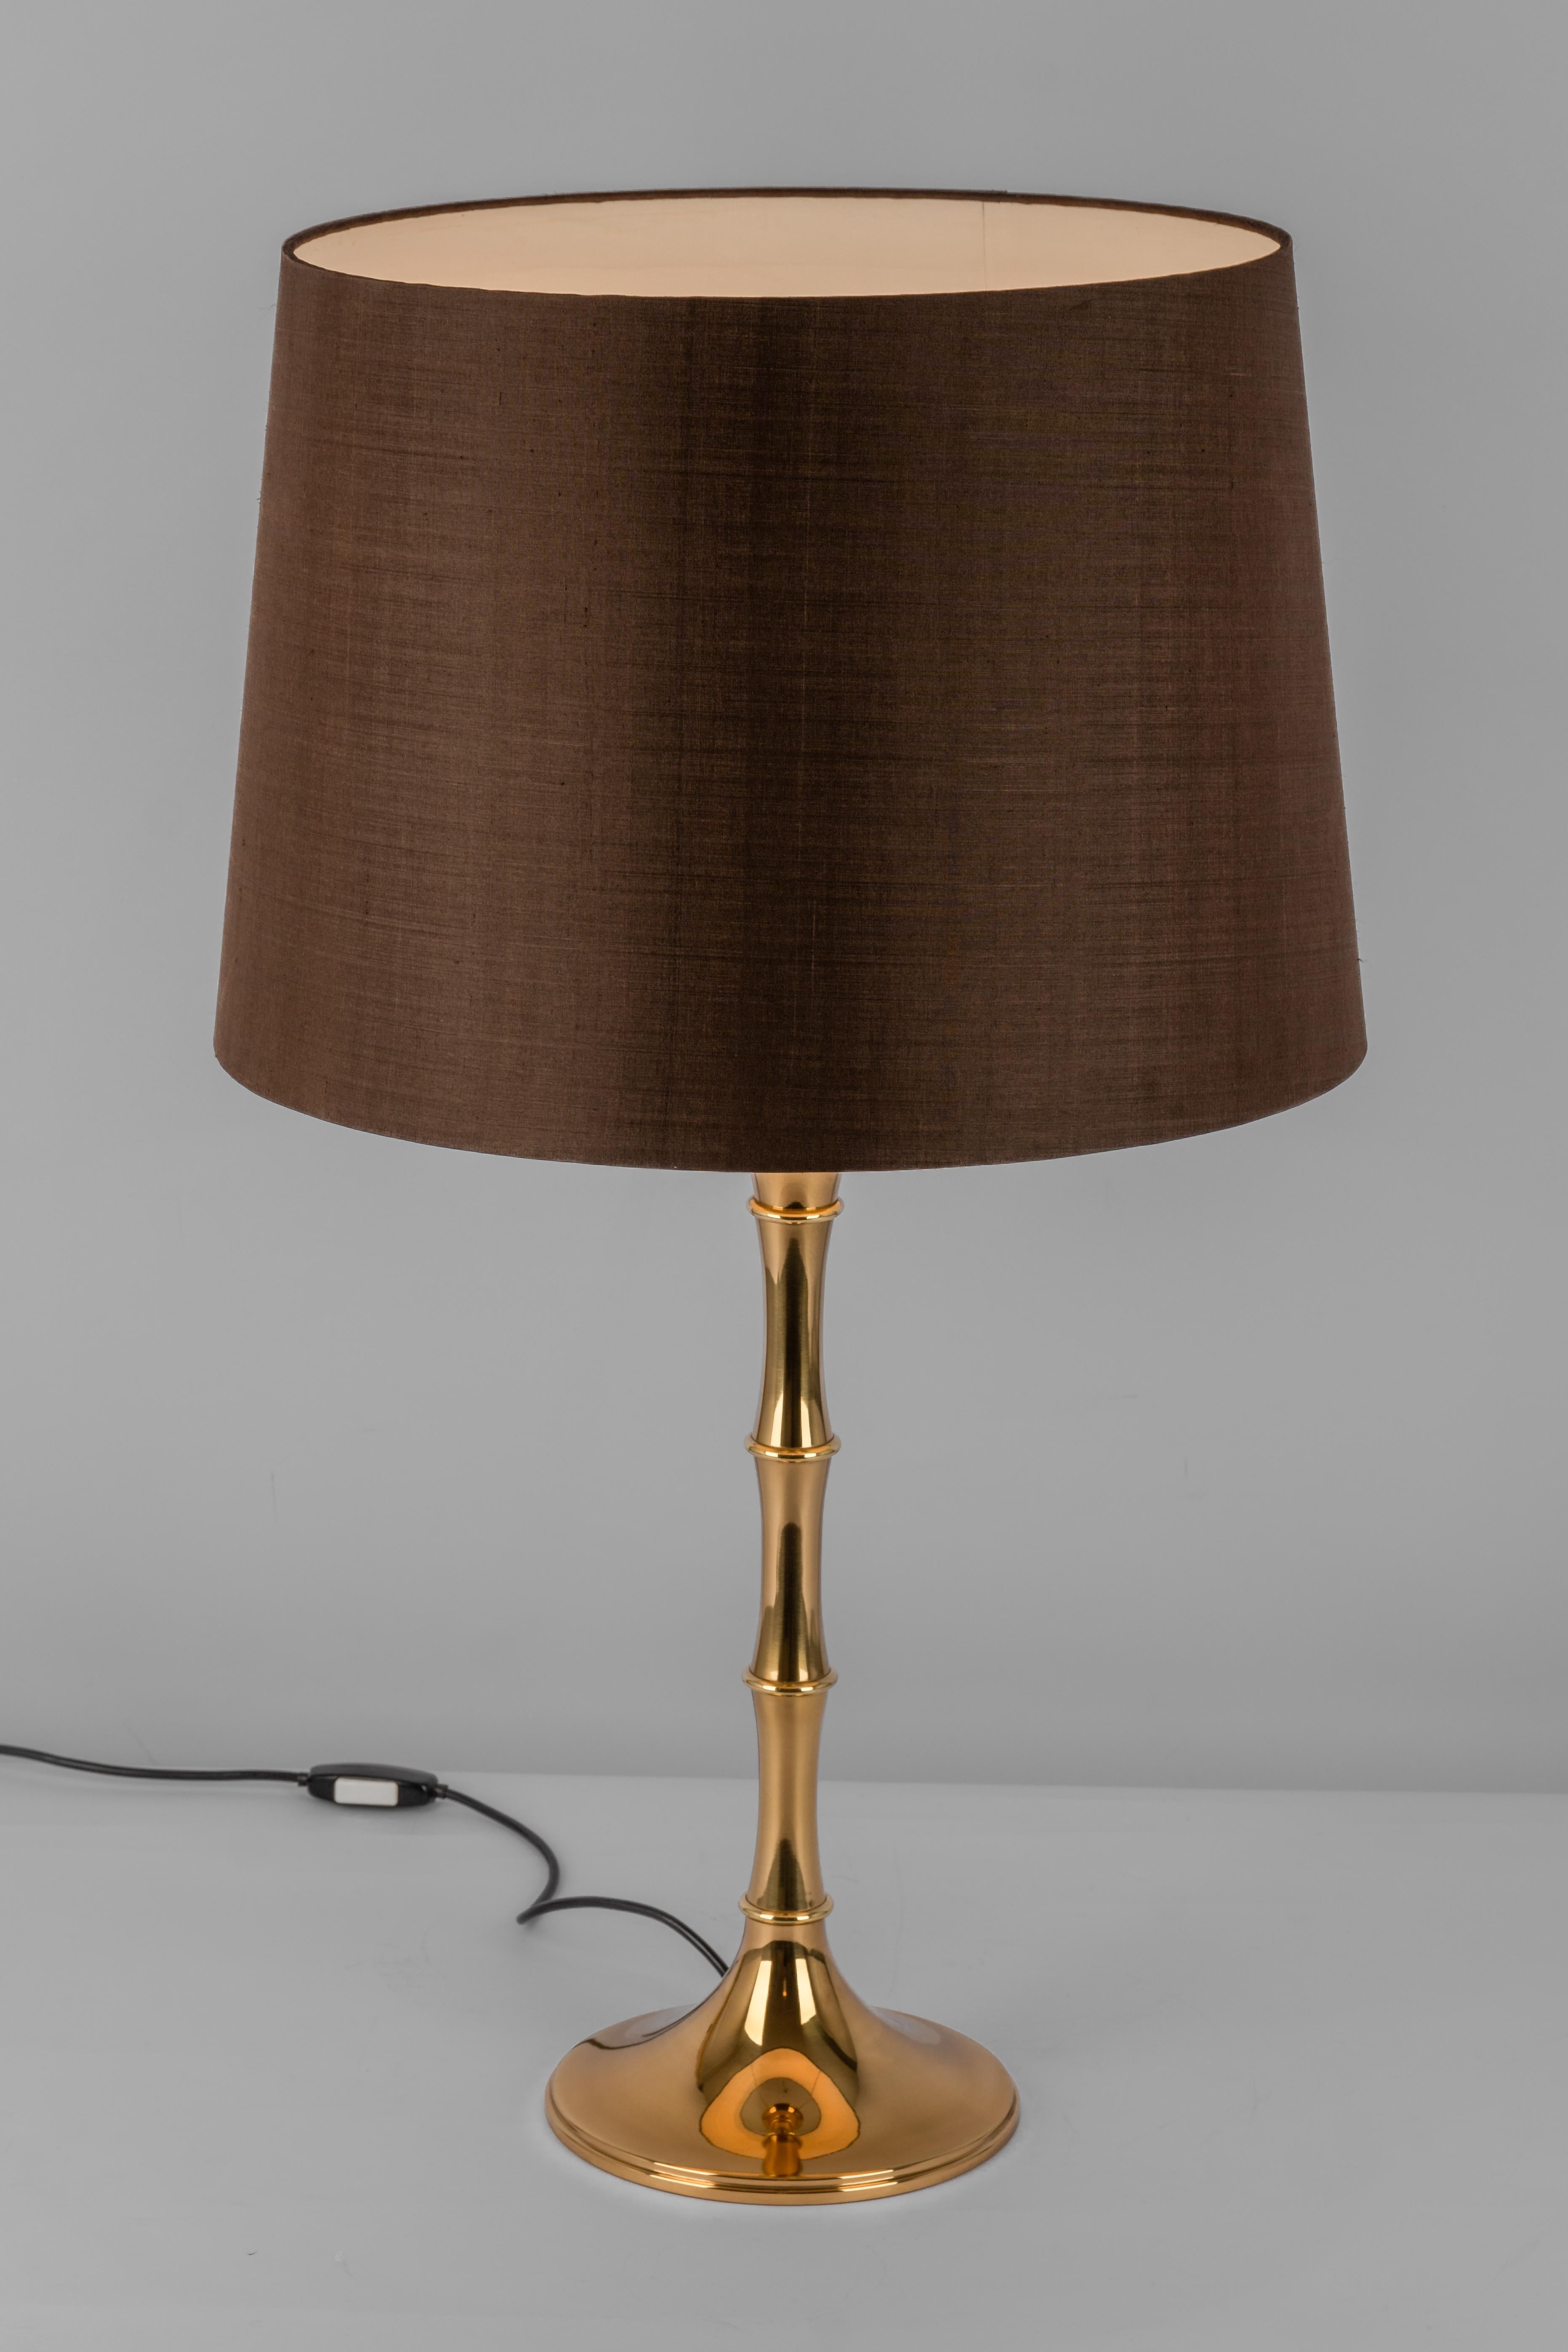 Pair of Bamboo Table Lamps by Ingo Maurer, Germany, 1970s For Sale 2